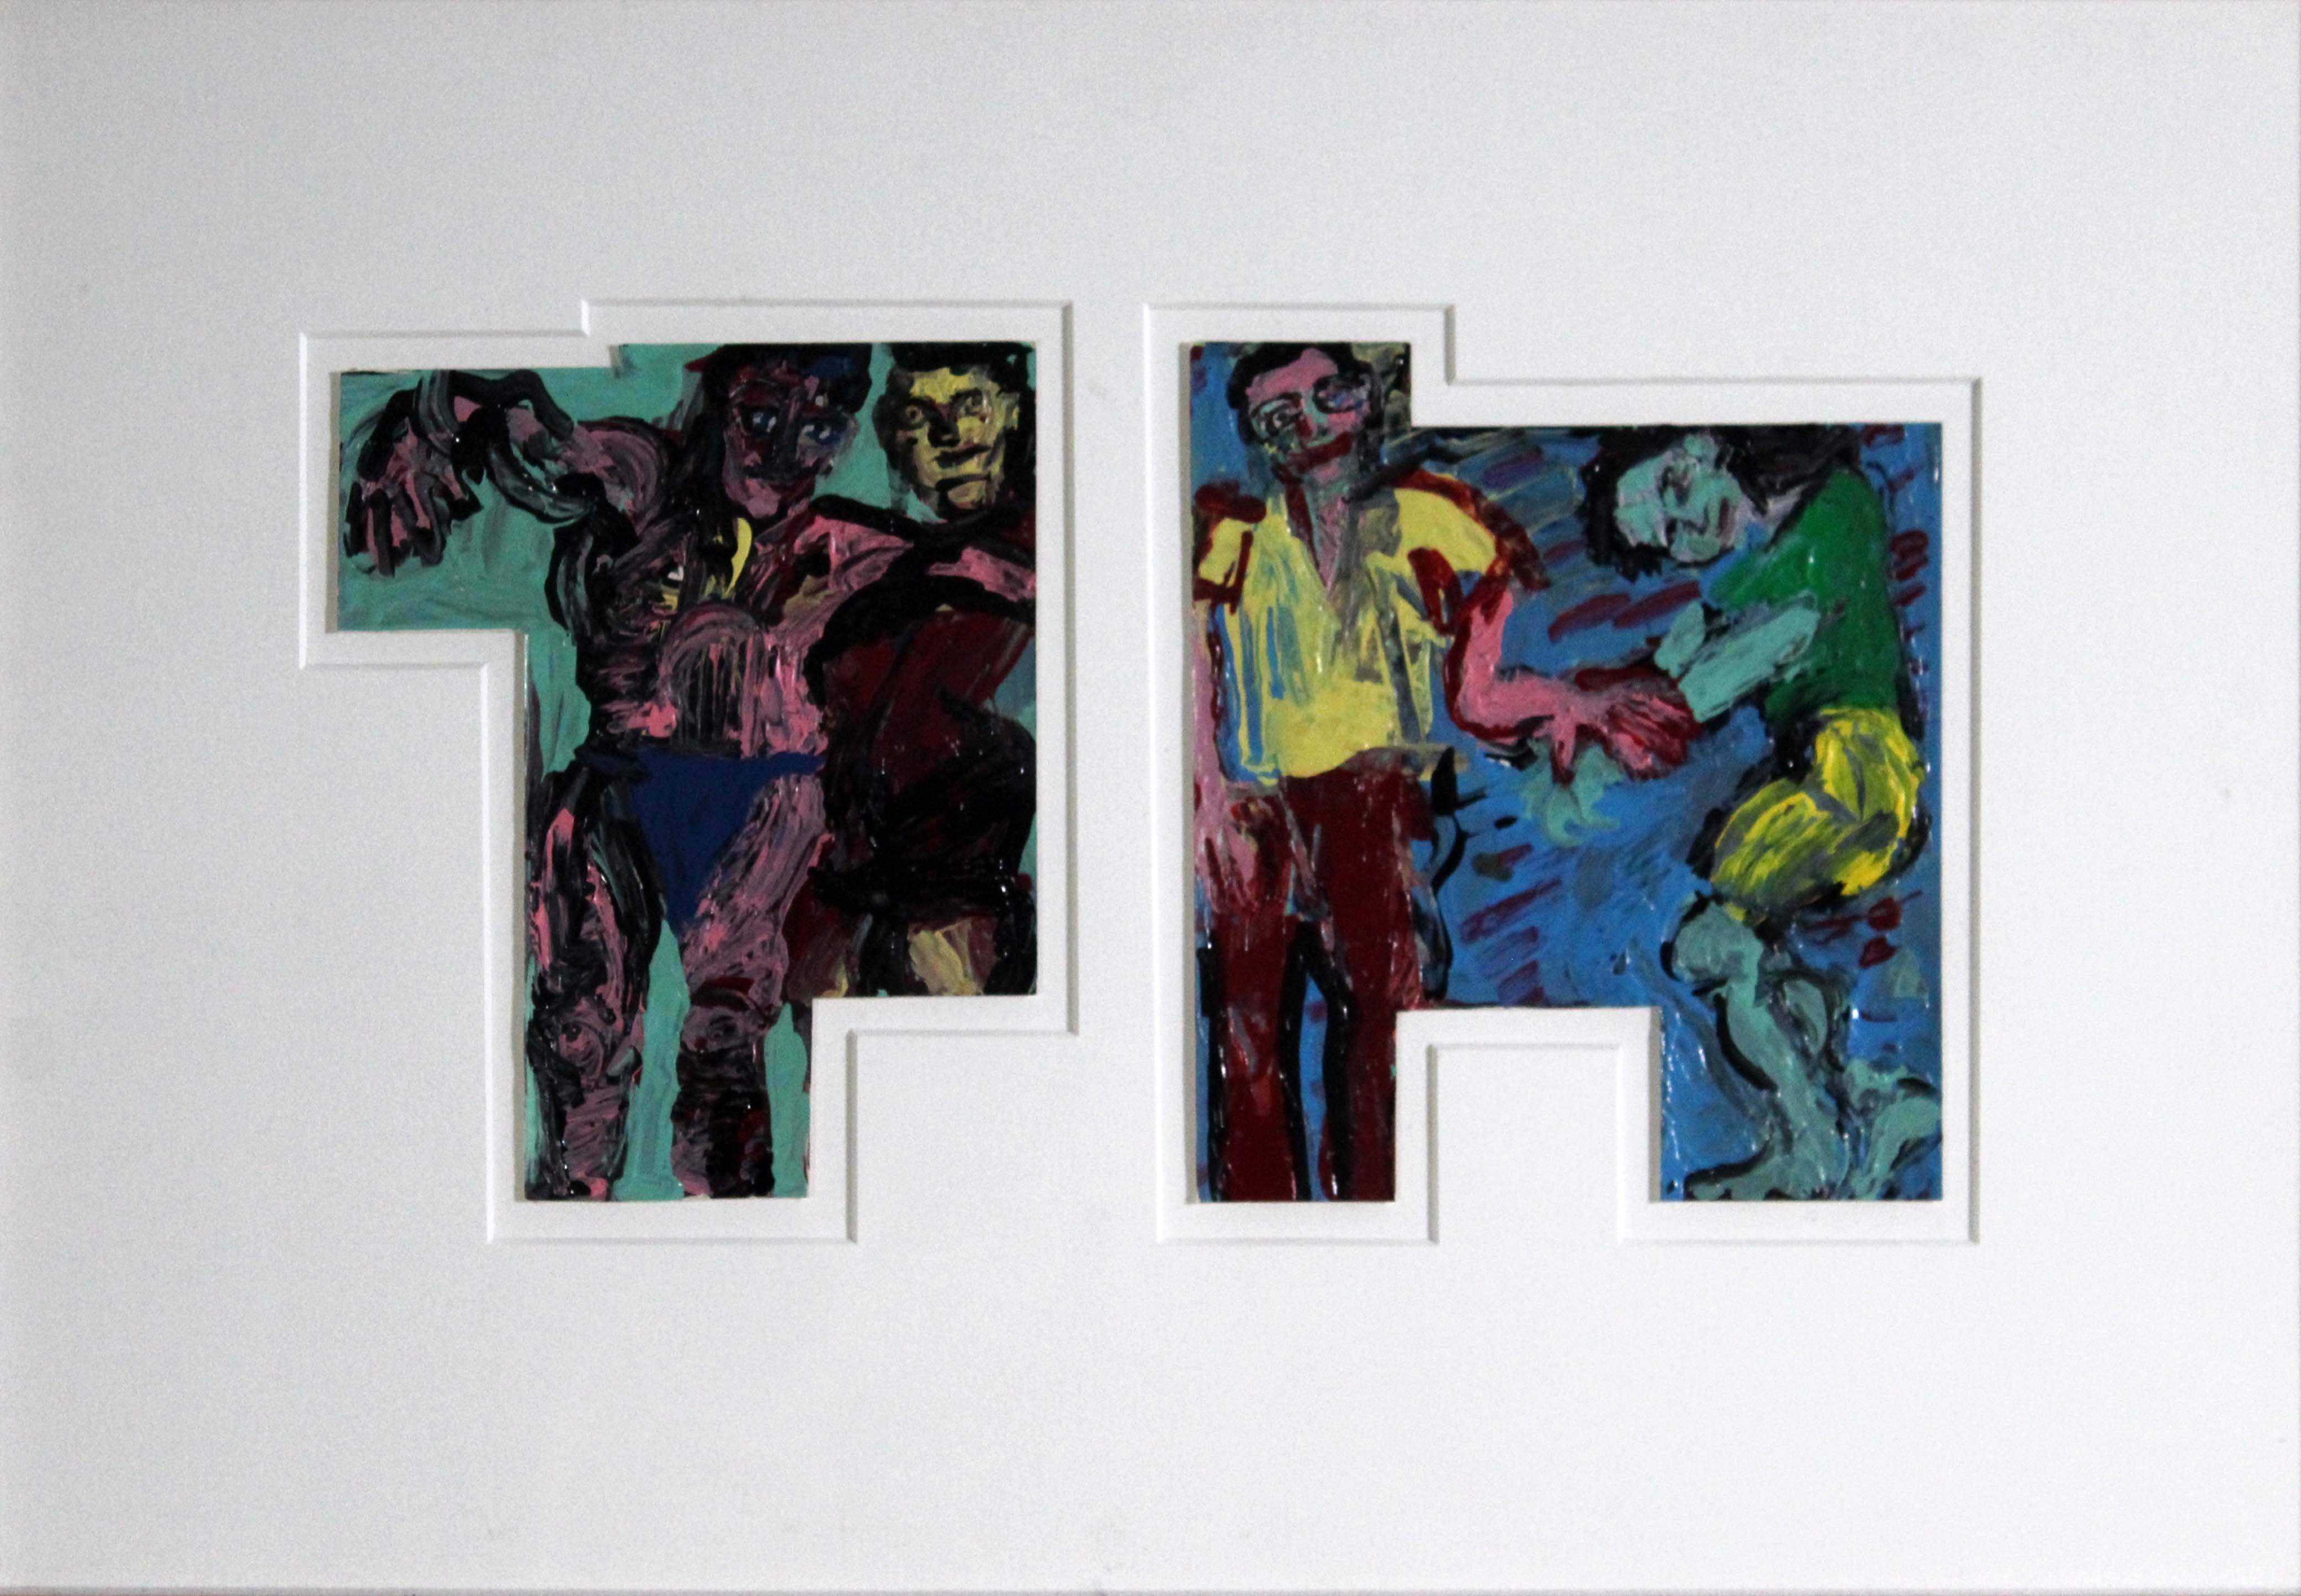 An intriguing composition of acrylic paintings on paper depicting expressive figures in the style of Egon Schiele. The modern figures are displayed in a unique geometric cutout matte. Dimensions: 20